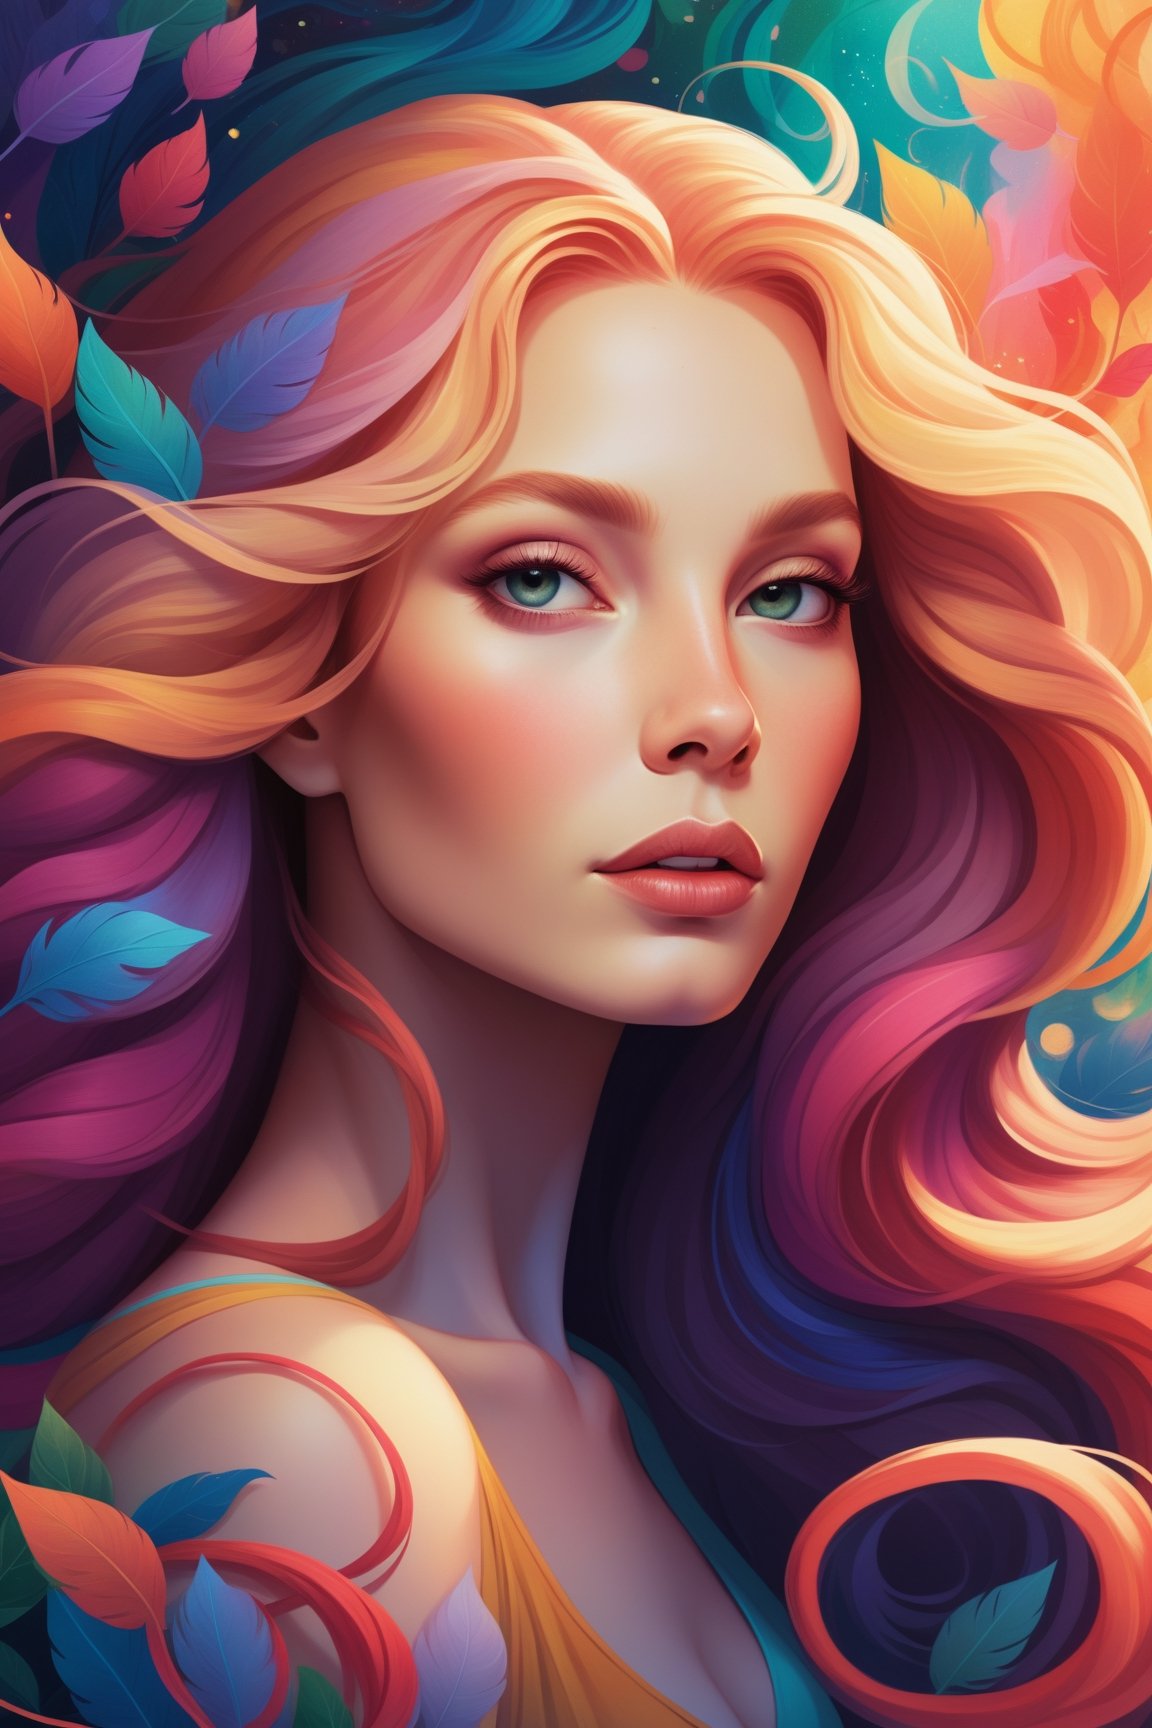 Demonstrative Lois van Baarle-style close up poster design, featuring an ethereal woman with long, luscious locks in vibrant hues, surrounded by dreamlike elements and captivating colors.